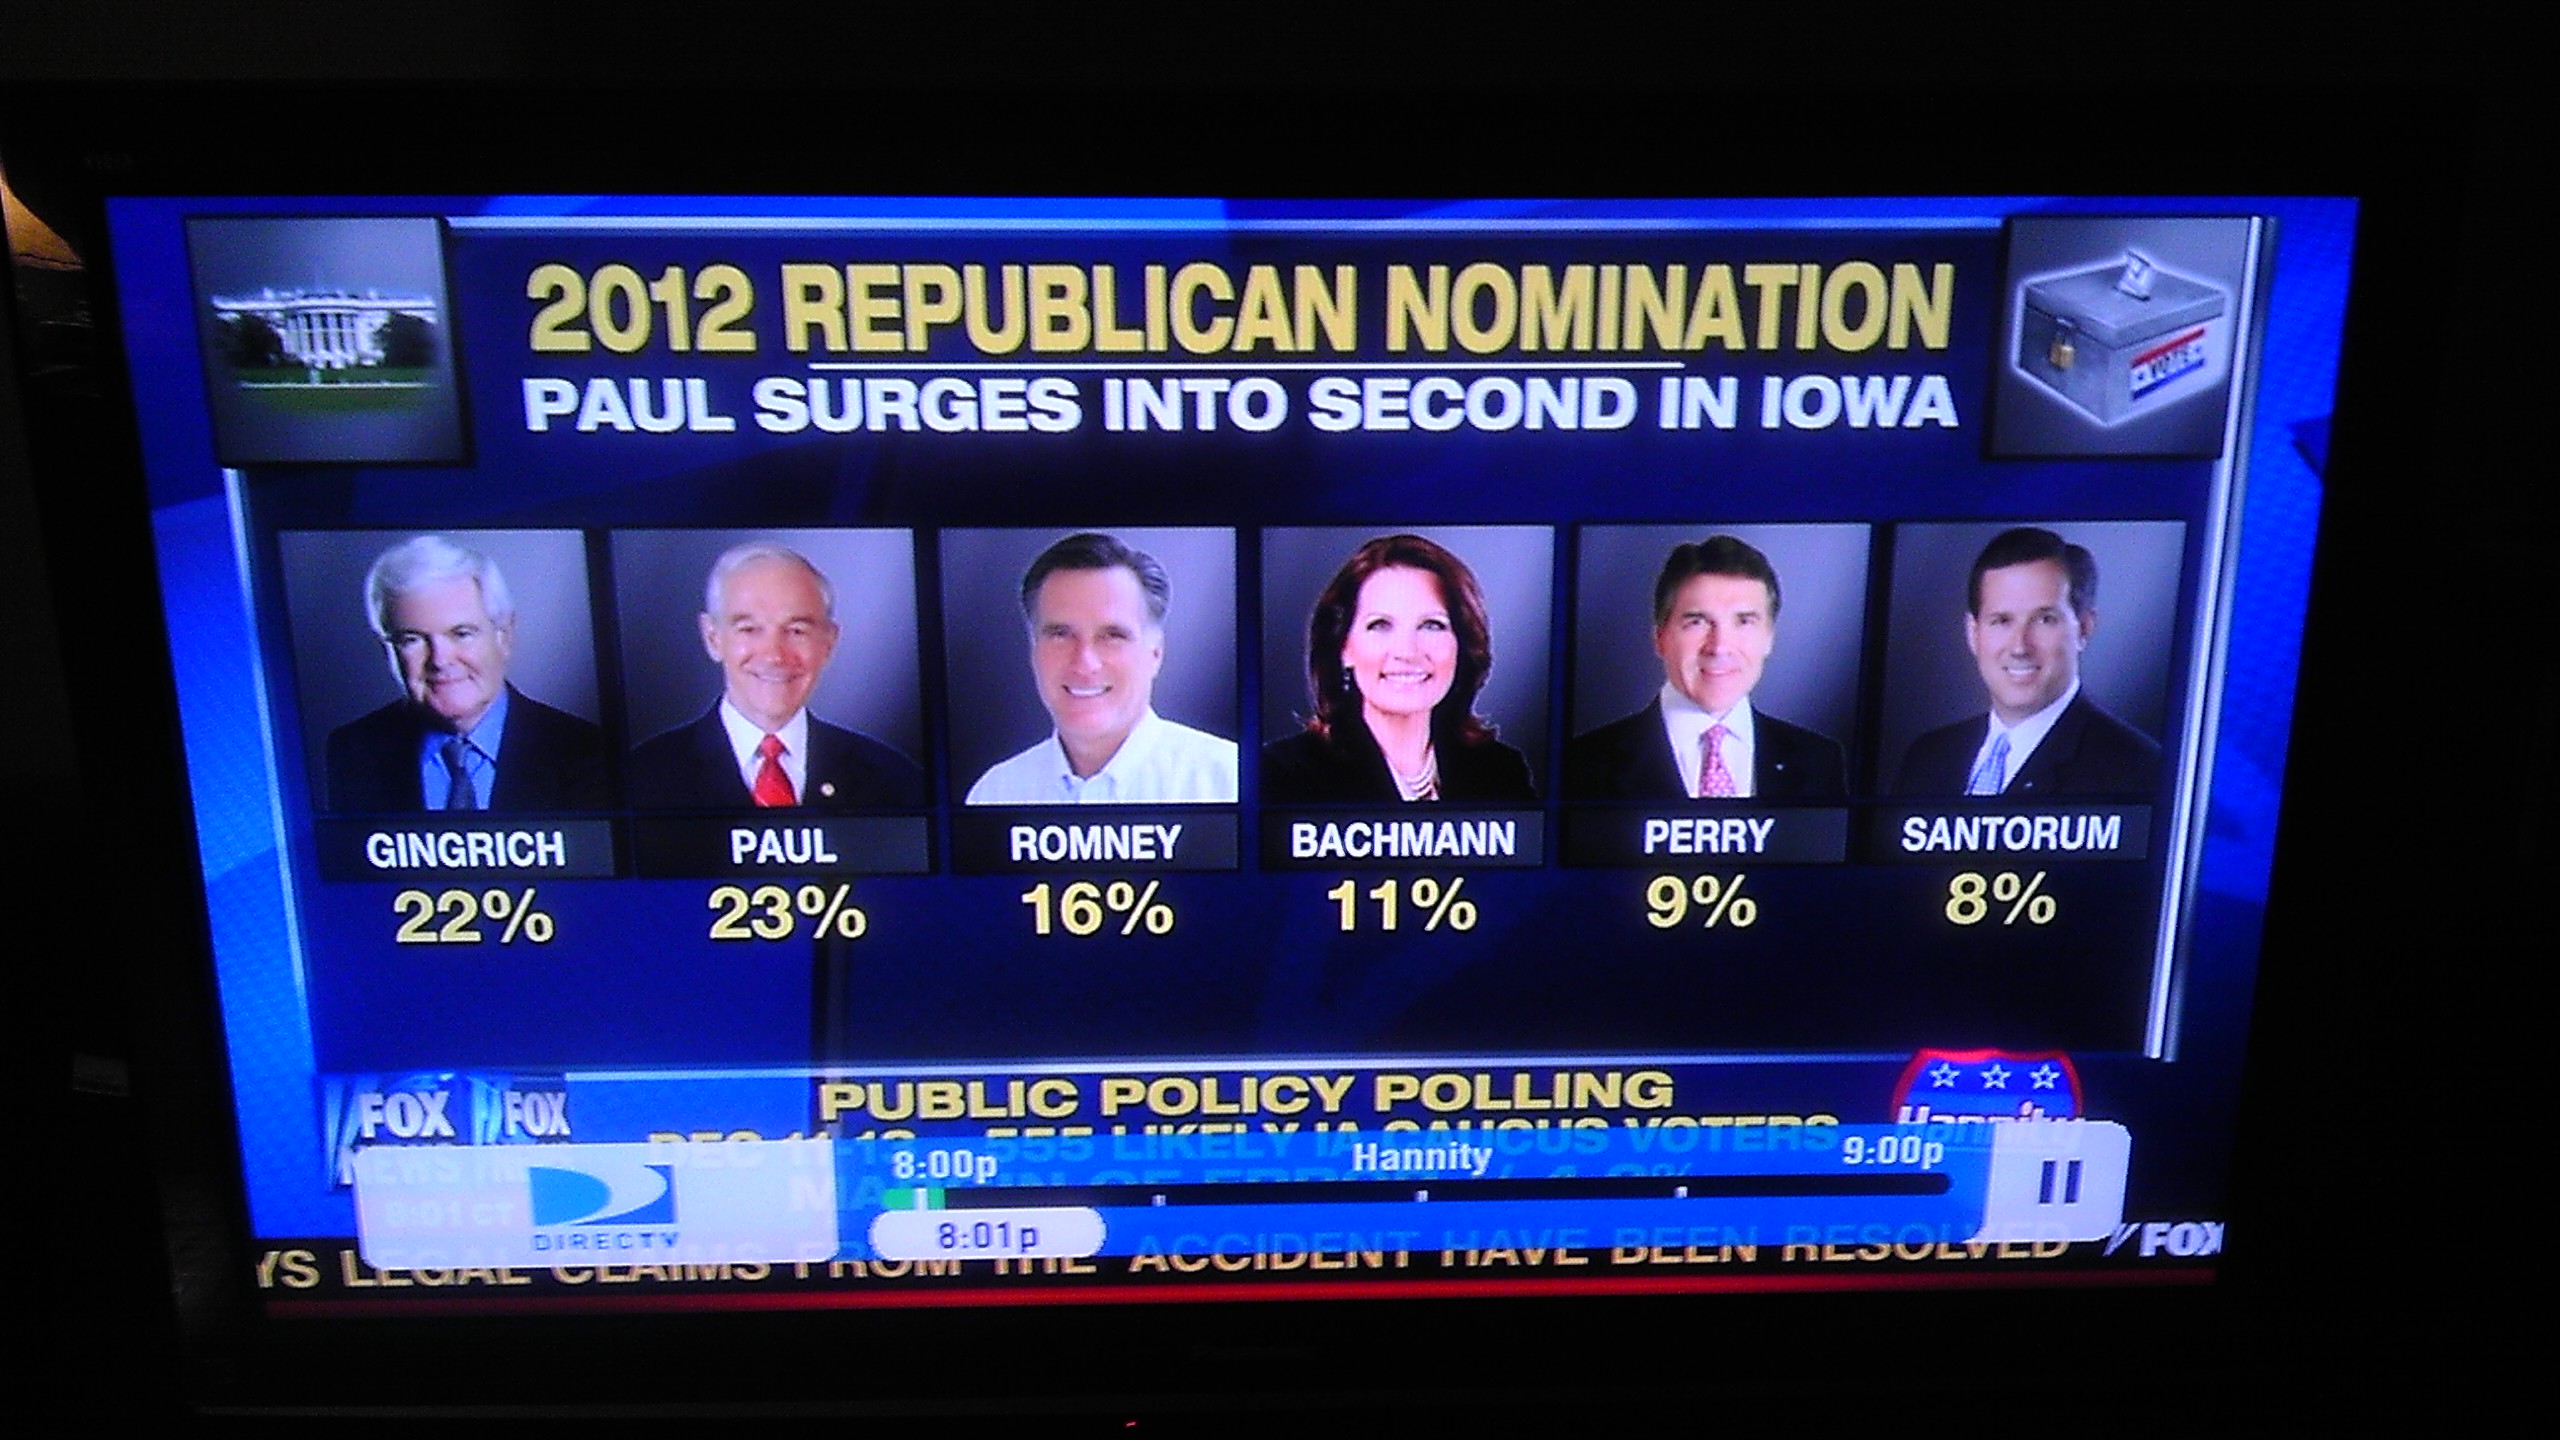 Ron Paul surging into 2nd?  Umm I demand a recount.. 